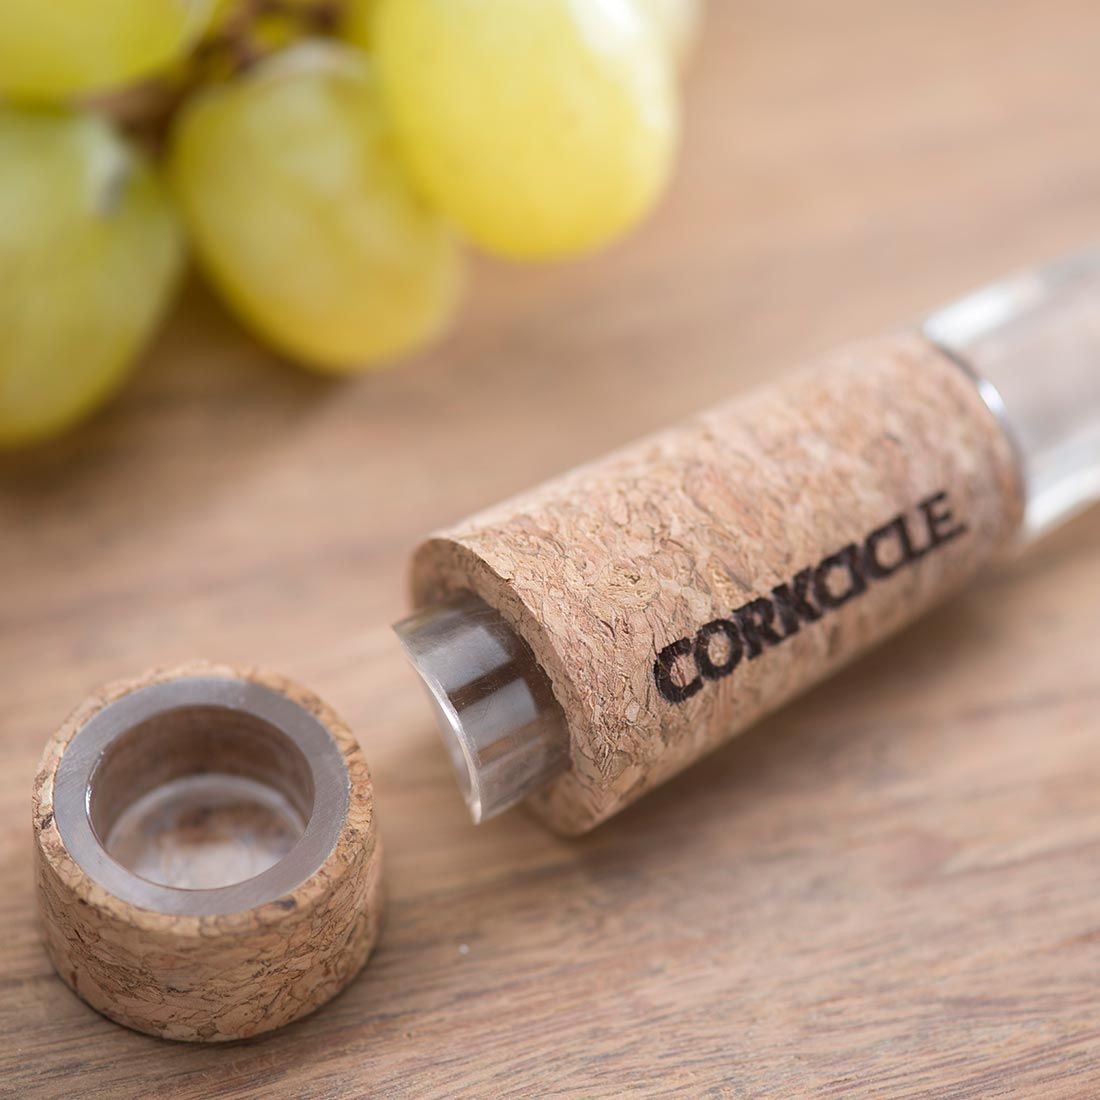 Corkcicle Air 4-in-1 Chiller, Aerator, Pourer, Stopper Wine Gadget Review  on Vimeo